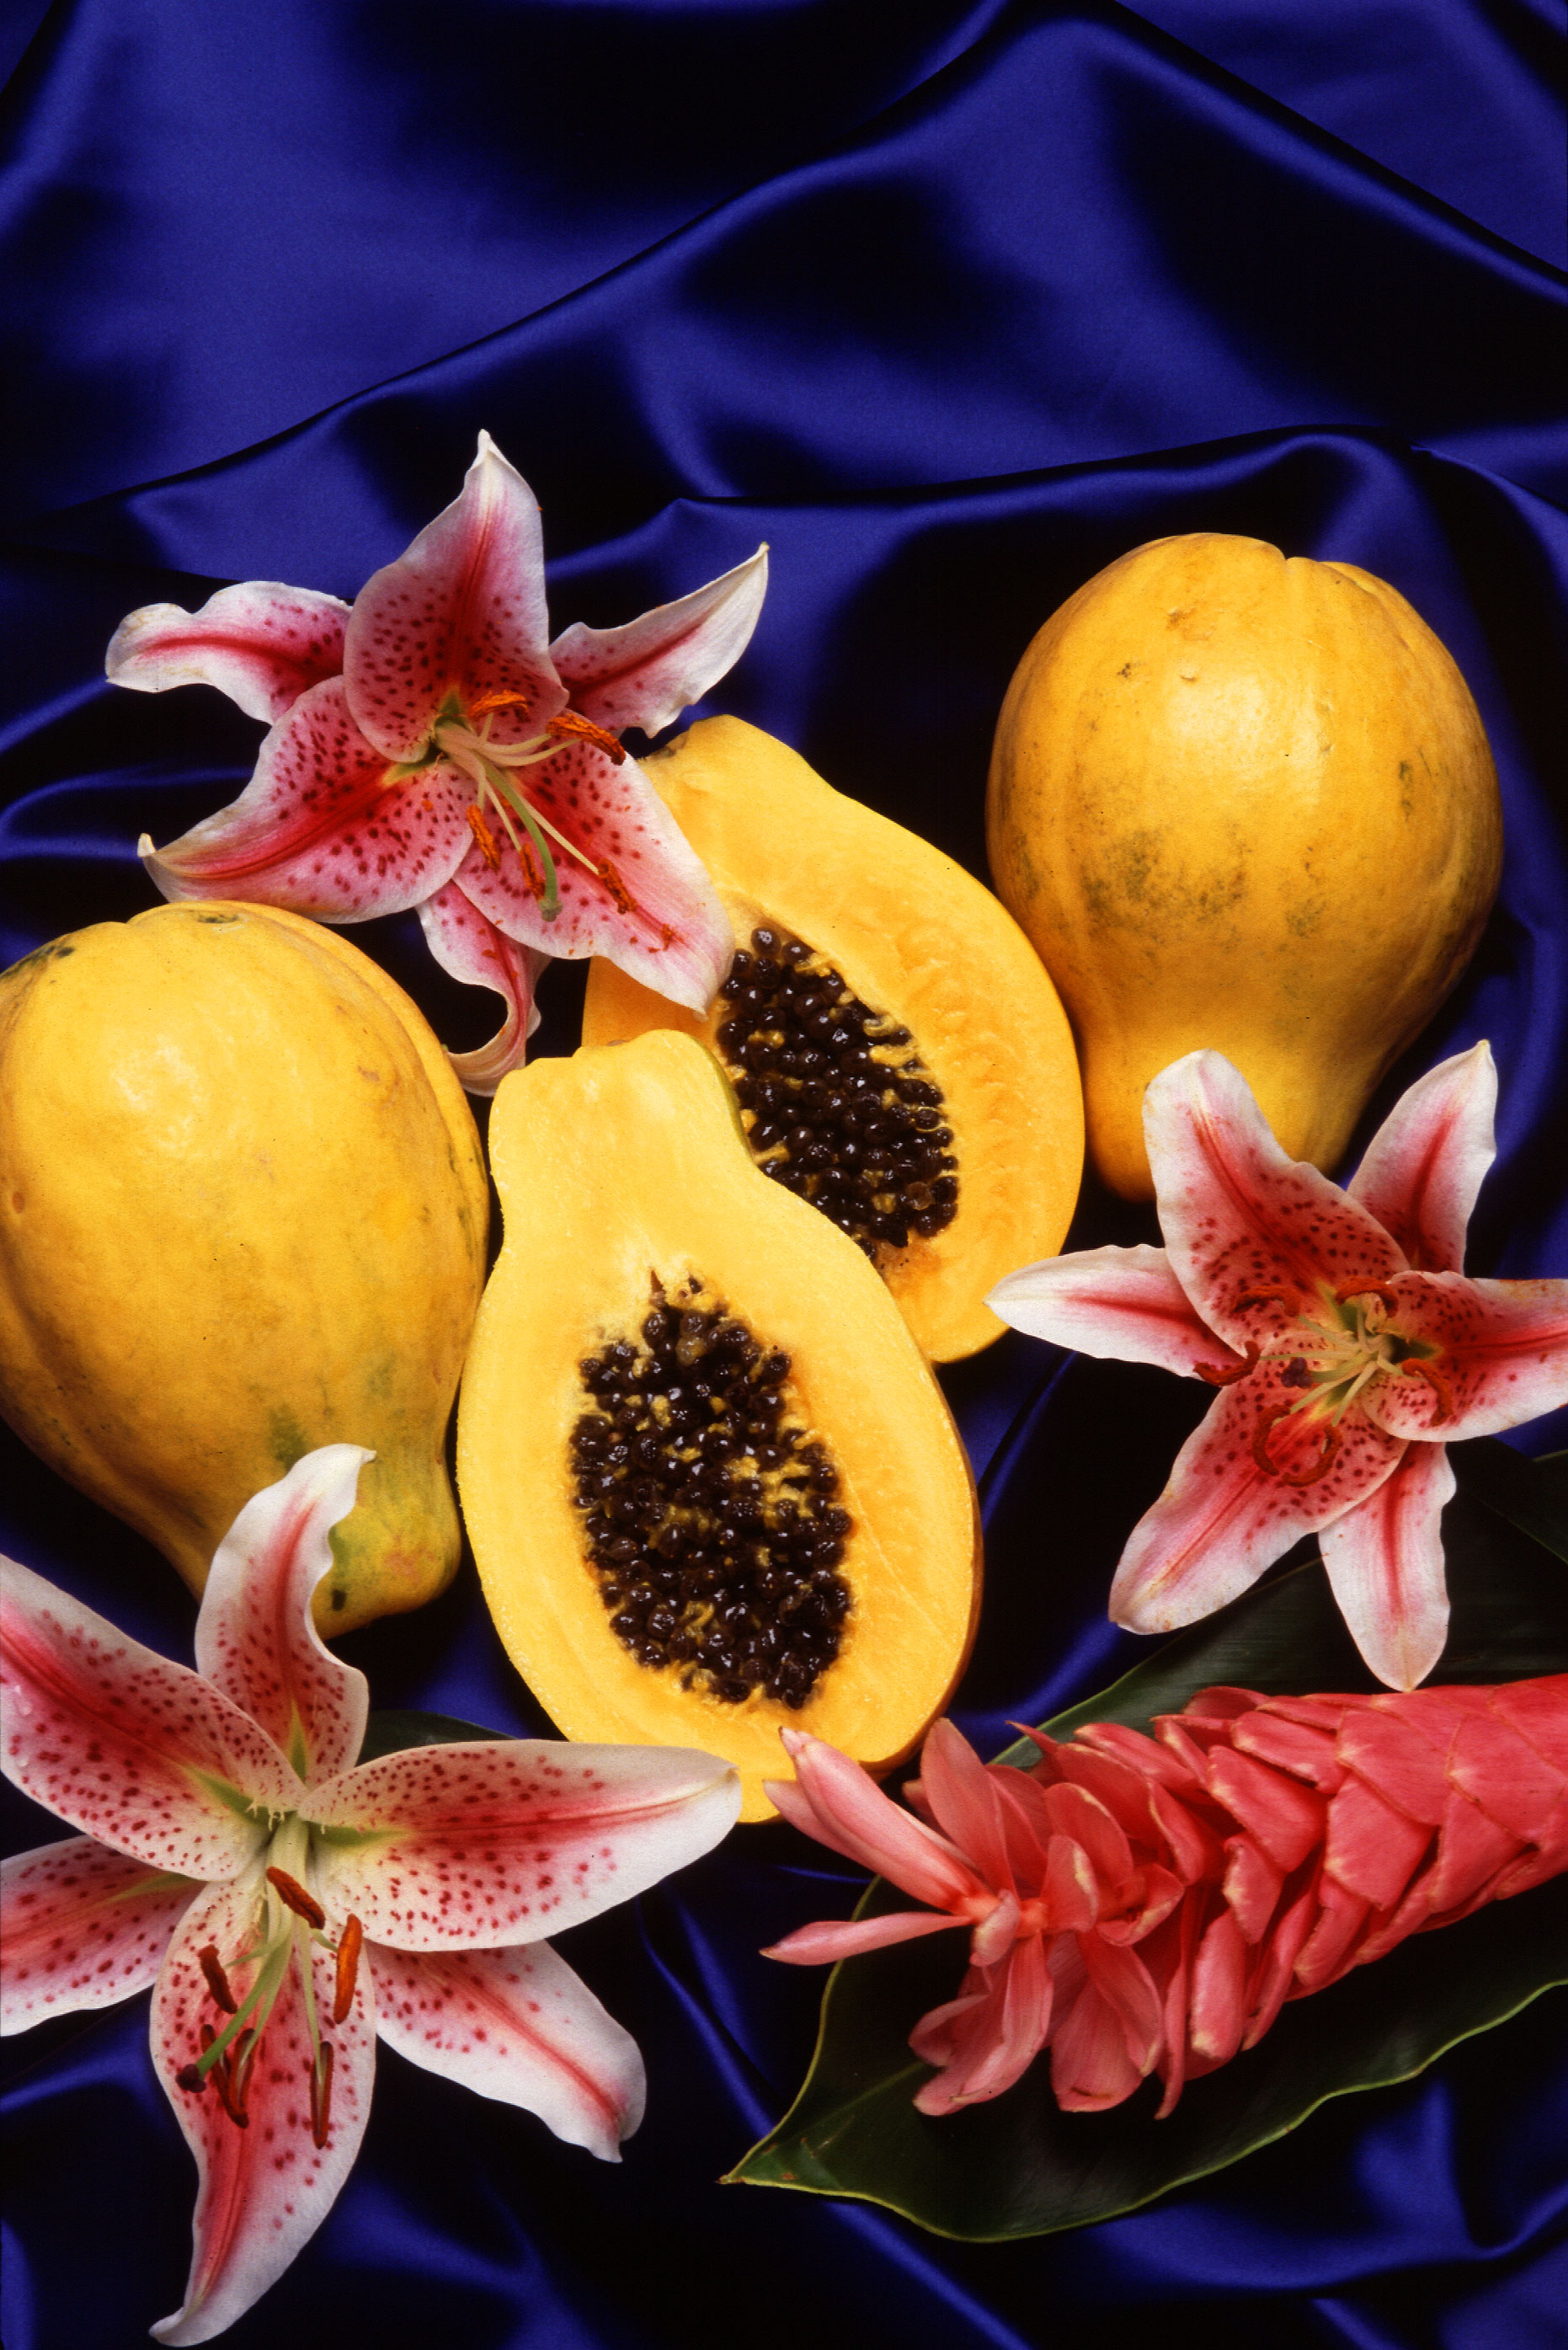 Papayas contain the enzyme papain, which helps loosen the bonds between dead skin cells, thereby exfoliating the skin and reducing the appearance of fine lines, wrinkles, and large pores when used topically in spa and beauty treatments. Photo by Scott Bauer, USDA ARS [Public domain], via Wikimedia 